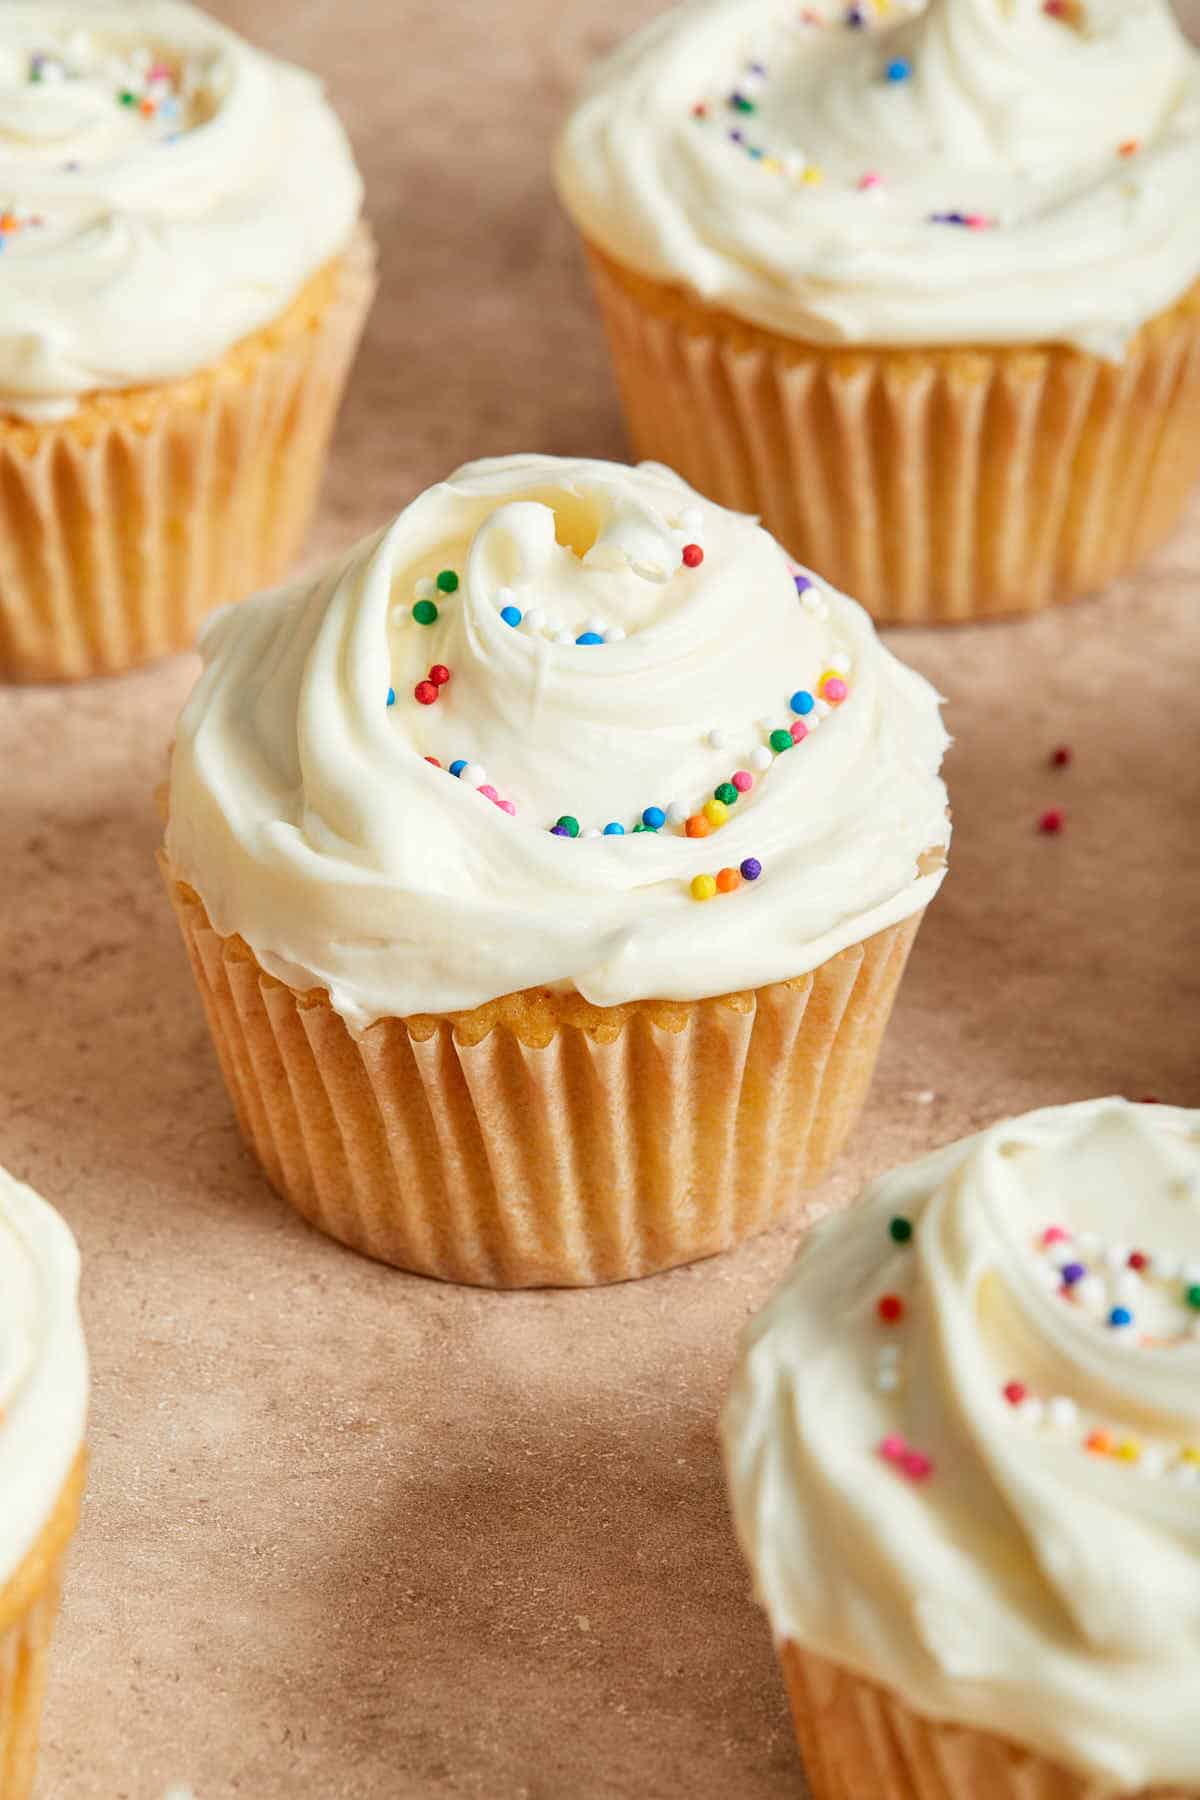 Frosted cupcakes with sprinkles, arranged on a beige coloured surface.